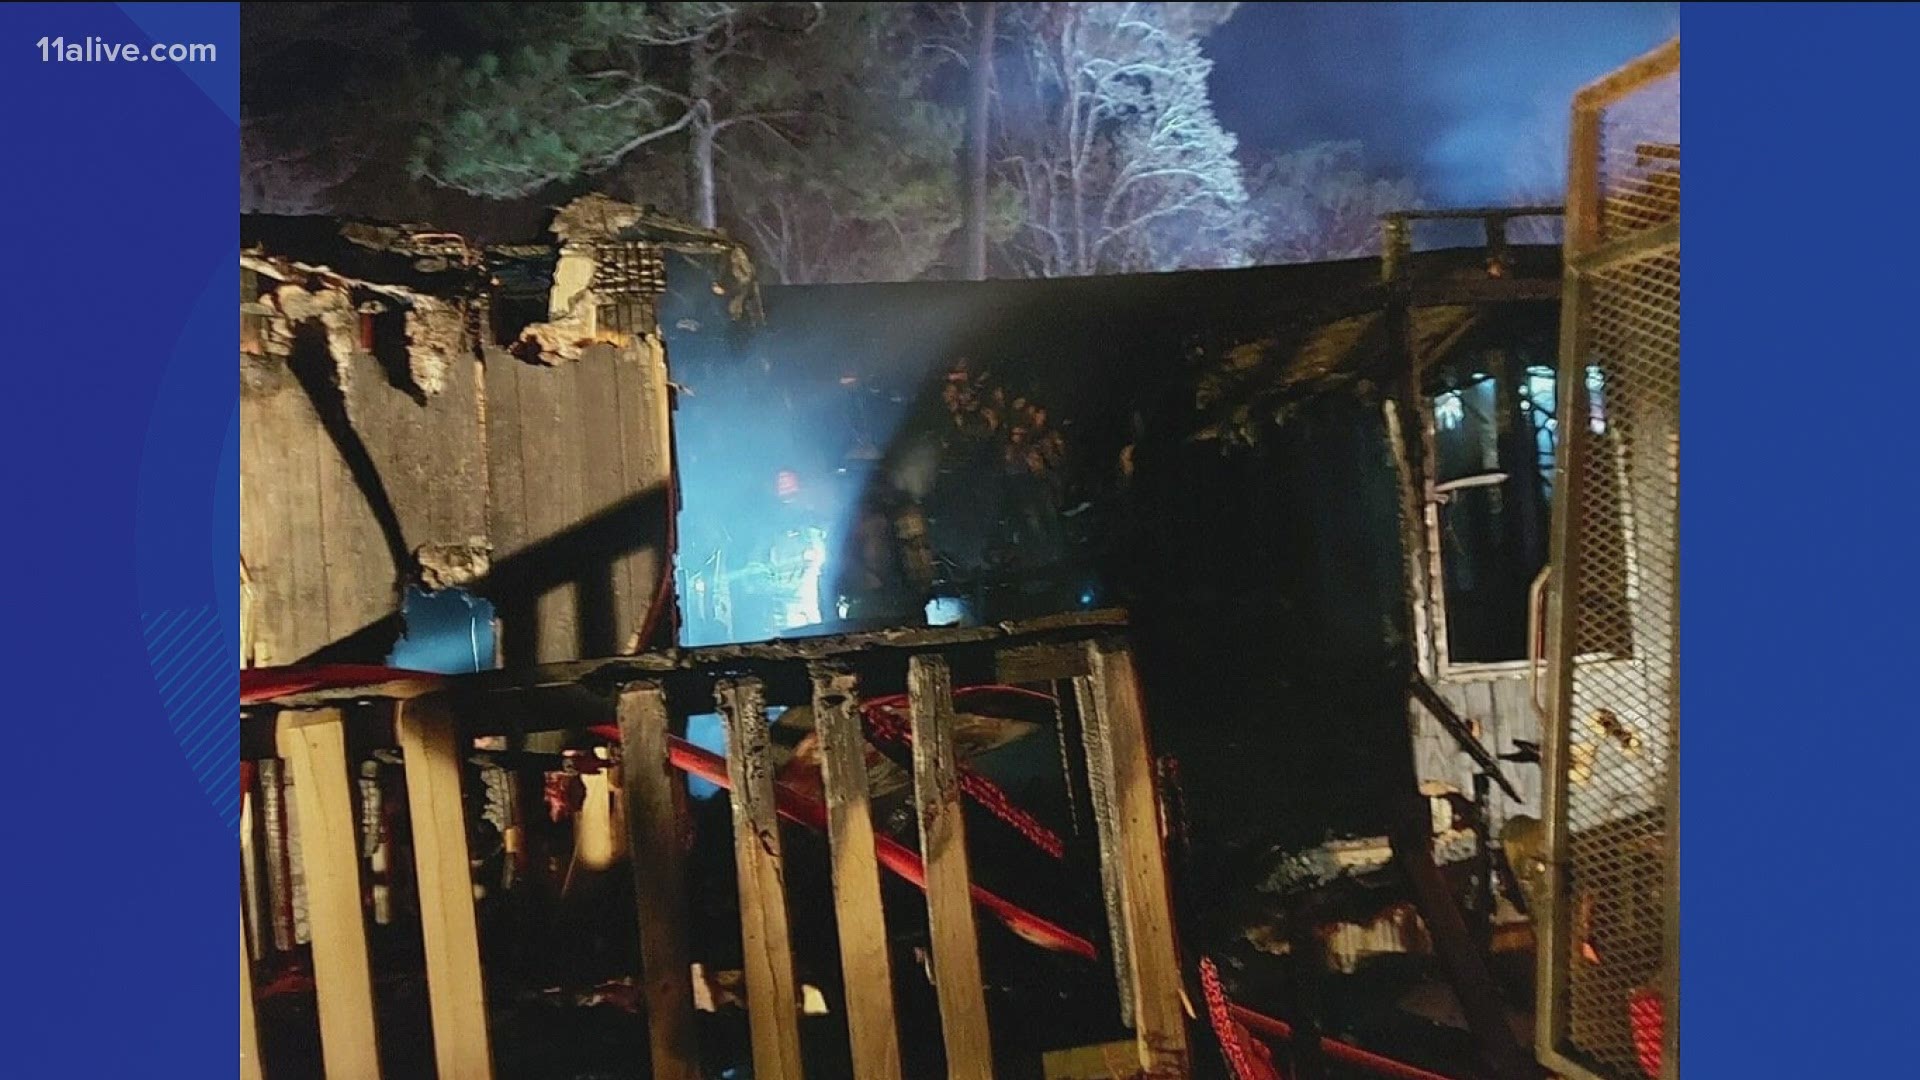 A family of four, including three children, died in a tragic early morning fire Saturday in Snellville.